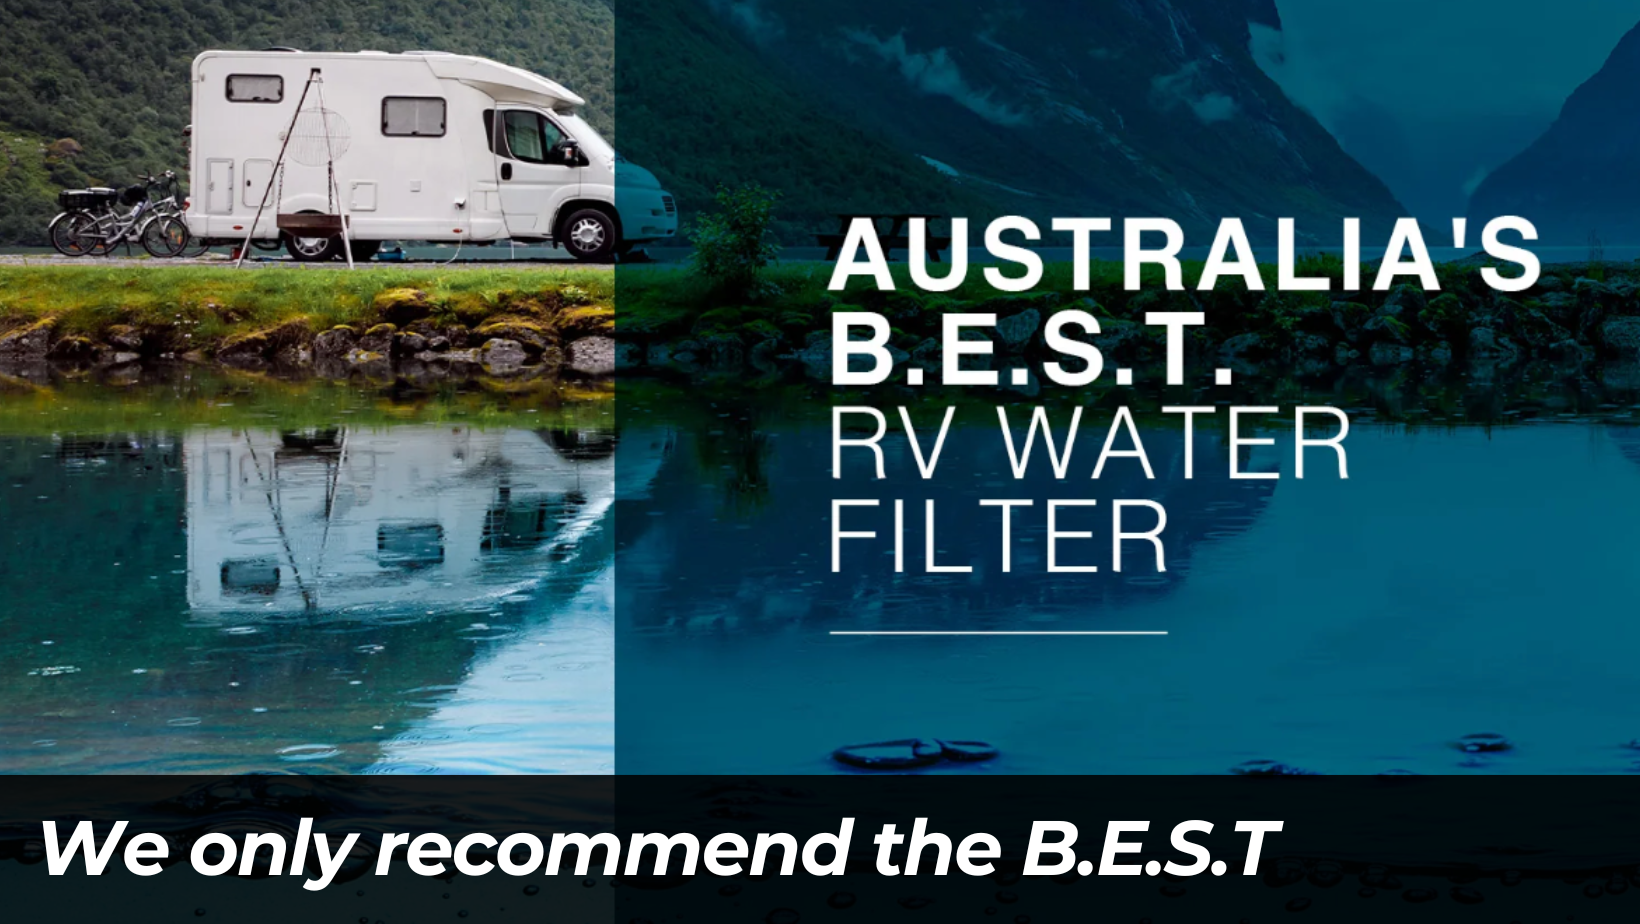 BEST Water Filter that we recommend